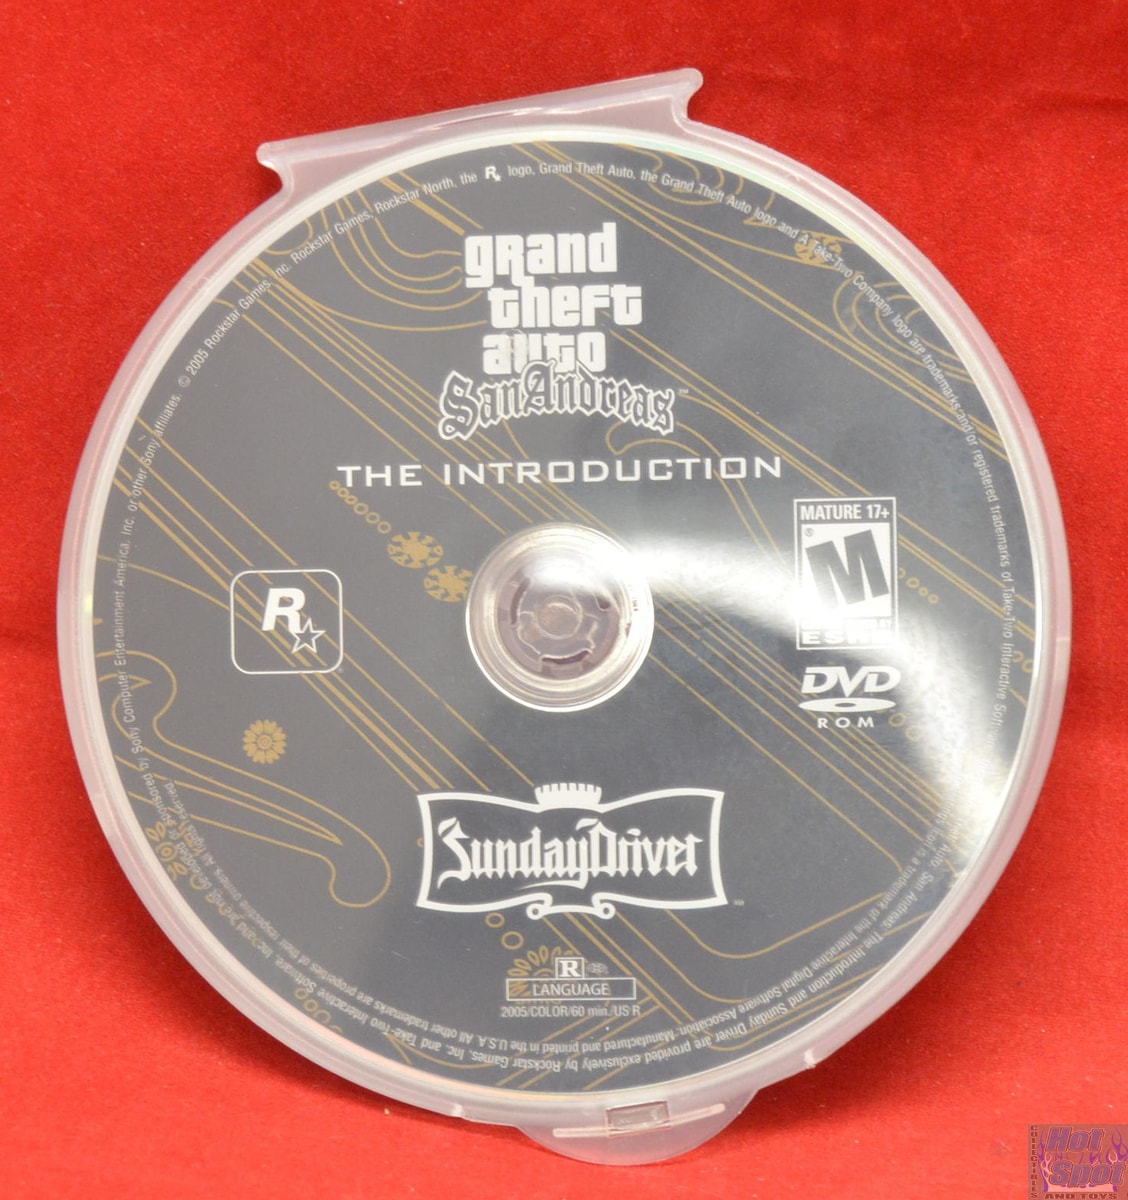 struik creatief Binnenshuis Hot Spot Collectibles and Toys - Grand Theft Auto San Andreas The  Introduction Game DISC ONLY PS3